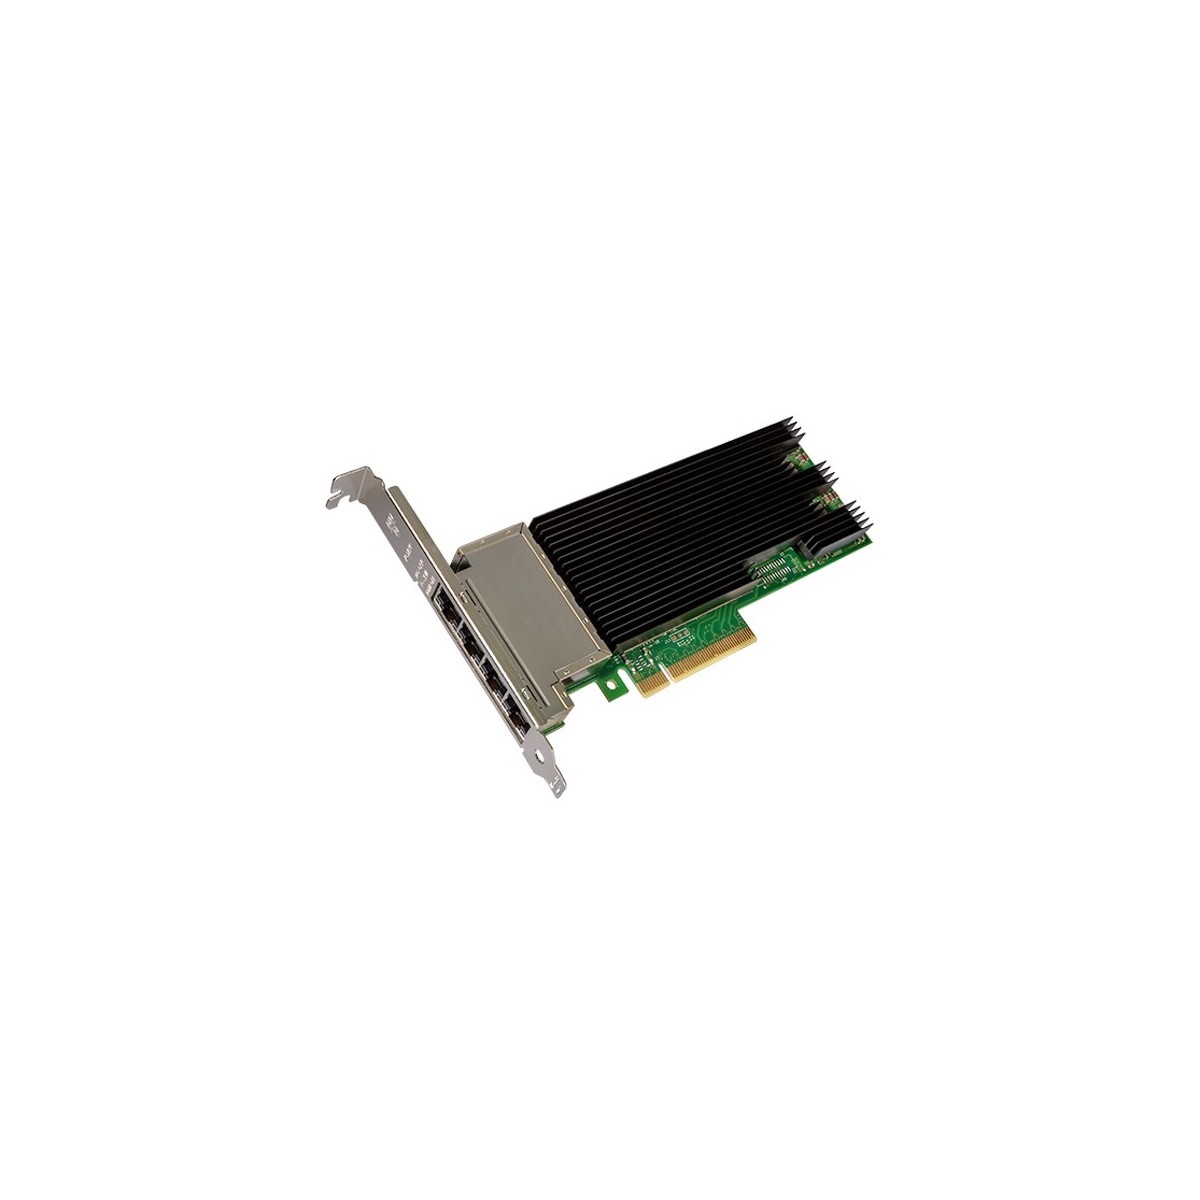 Intel X710T4 - Internal - Wired - PCI Express - Ethernet - 10000 Mbit-s - Black - Green